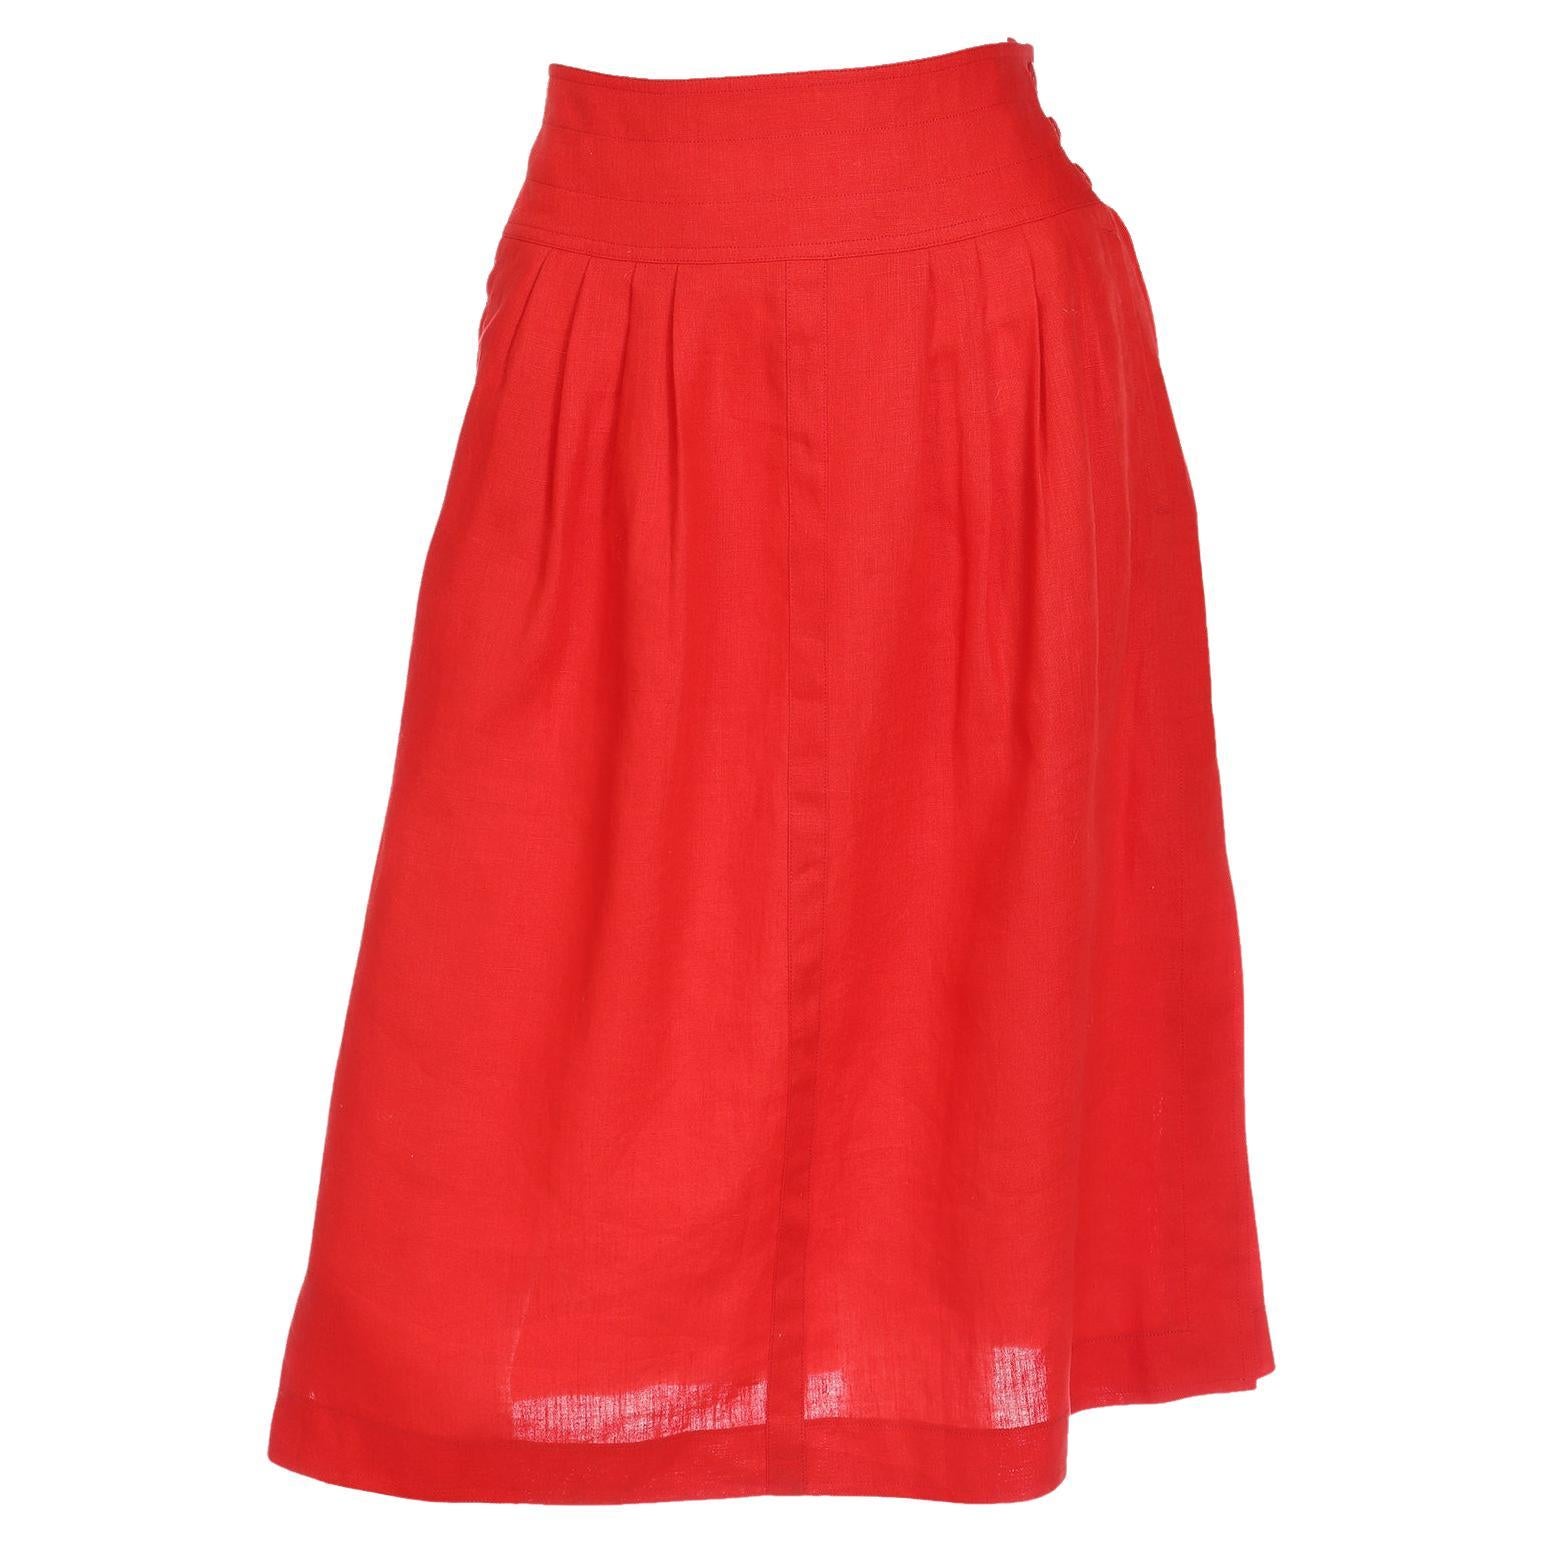 1980s G Gucci Tomato Red 100% Linen Vintage Skirt For Sale